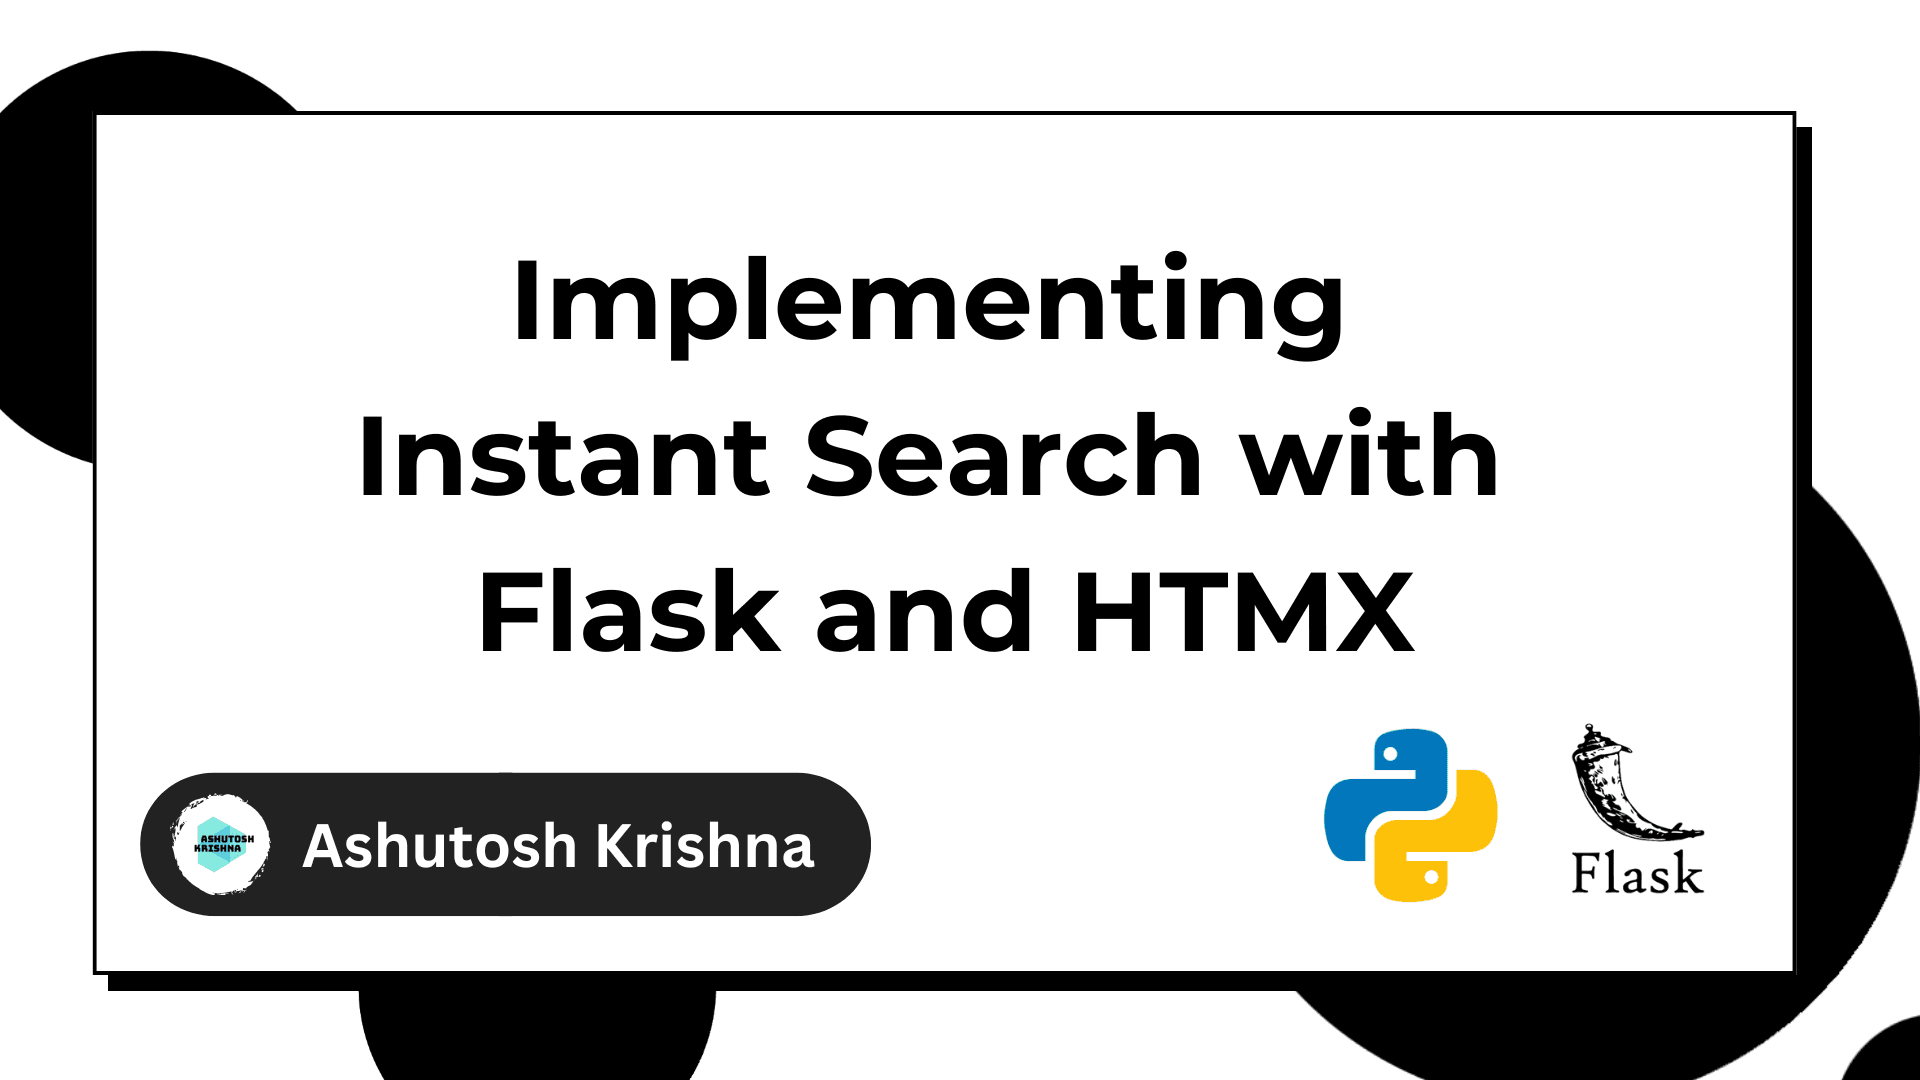 Implementing Instant Search with Flask and HTMX